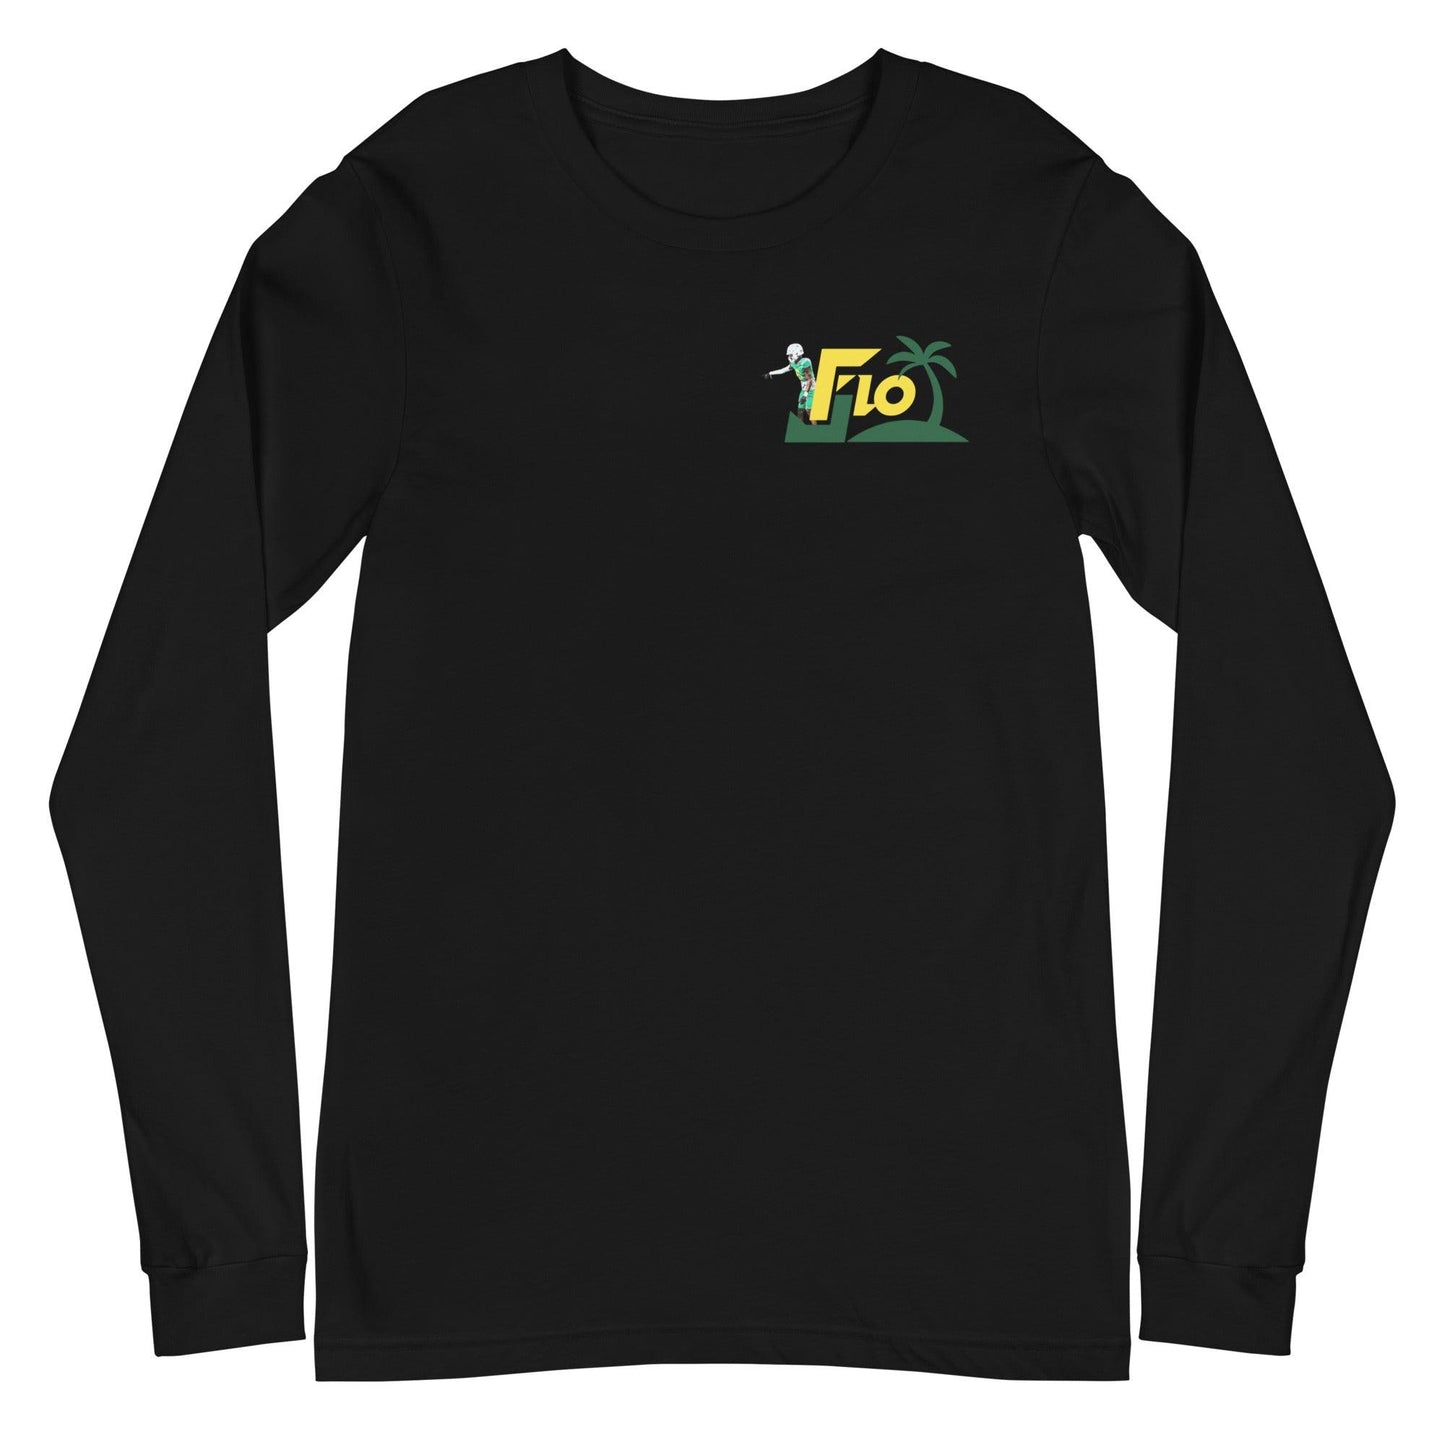 Jahlil Florence “Essential” Long Sleeve Tee - Fan Arch